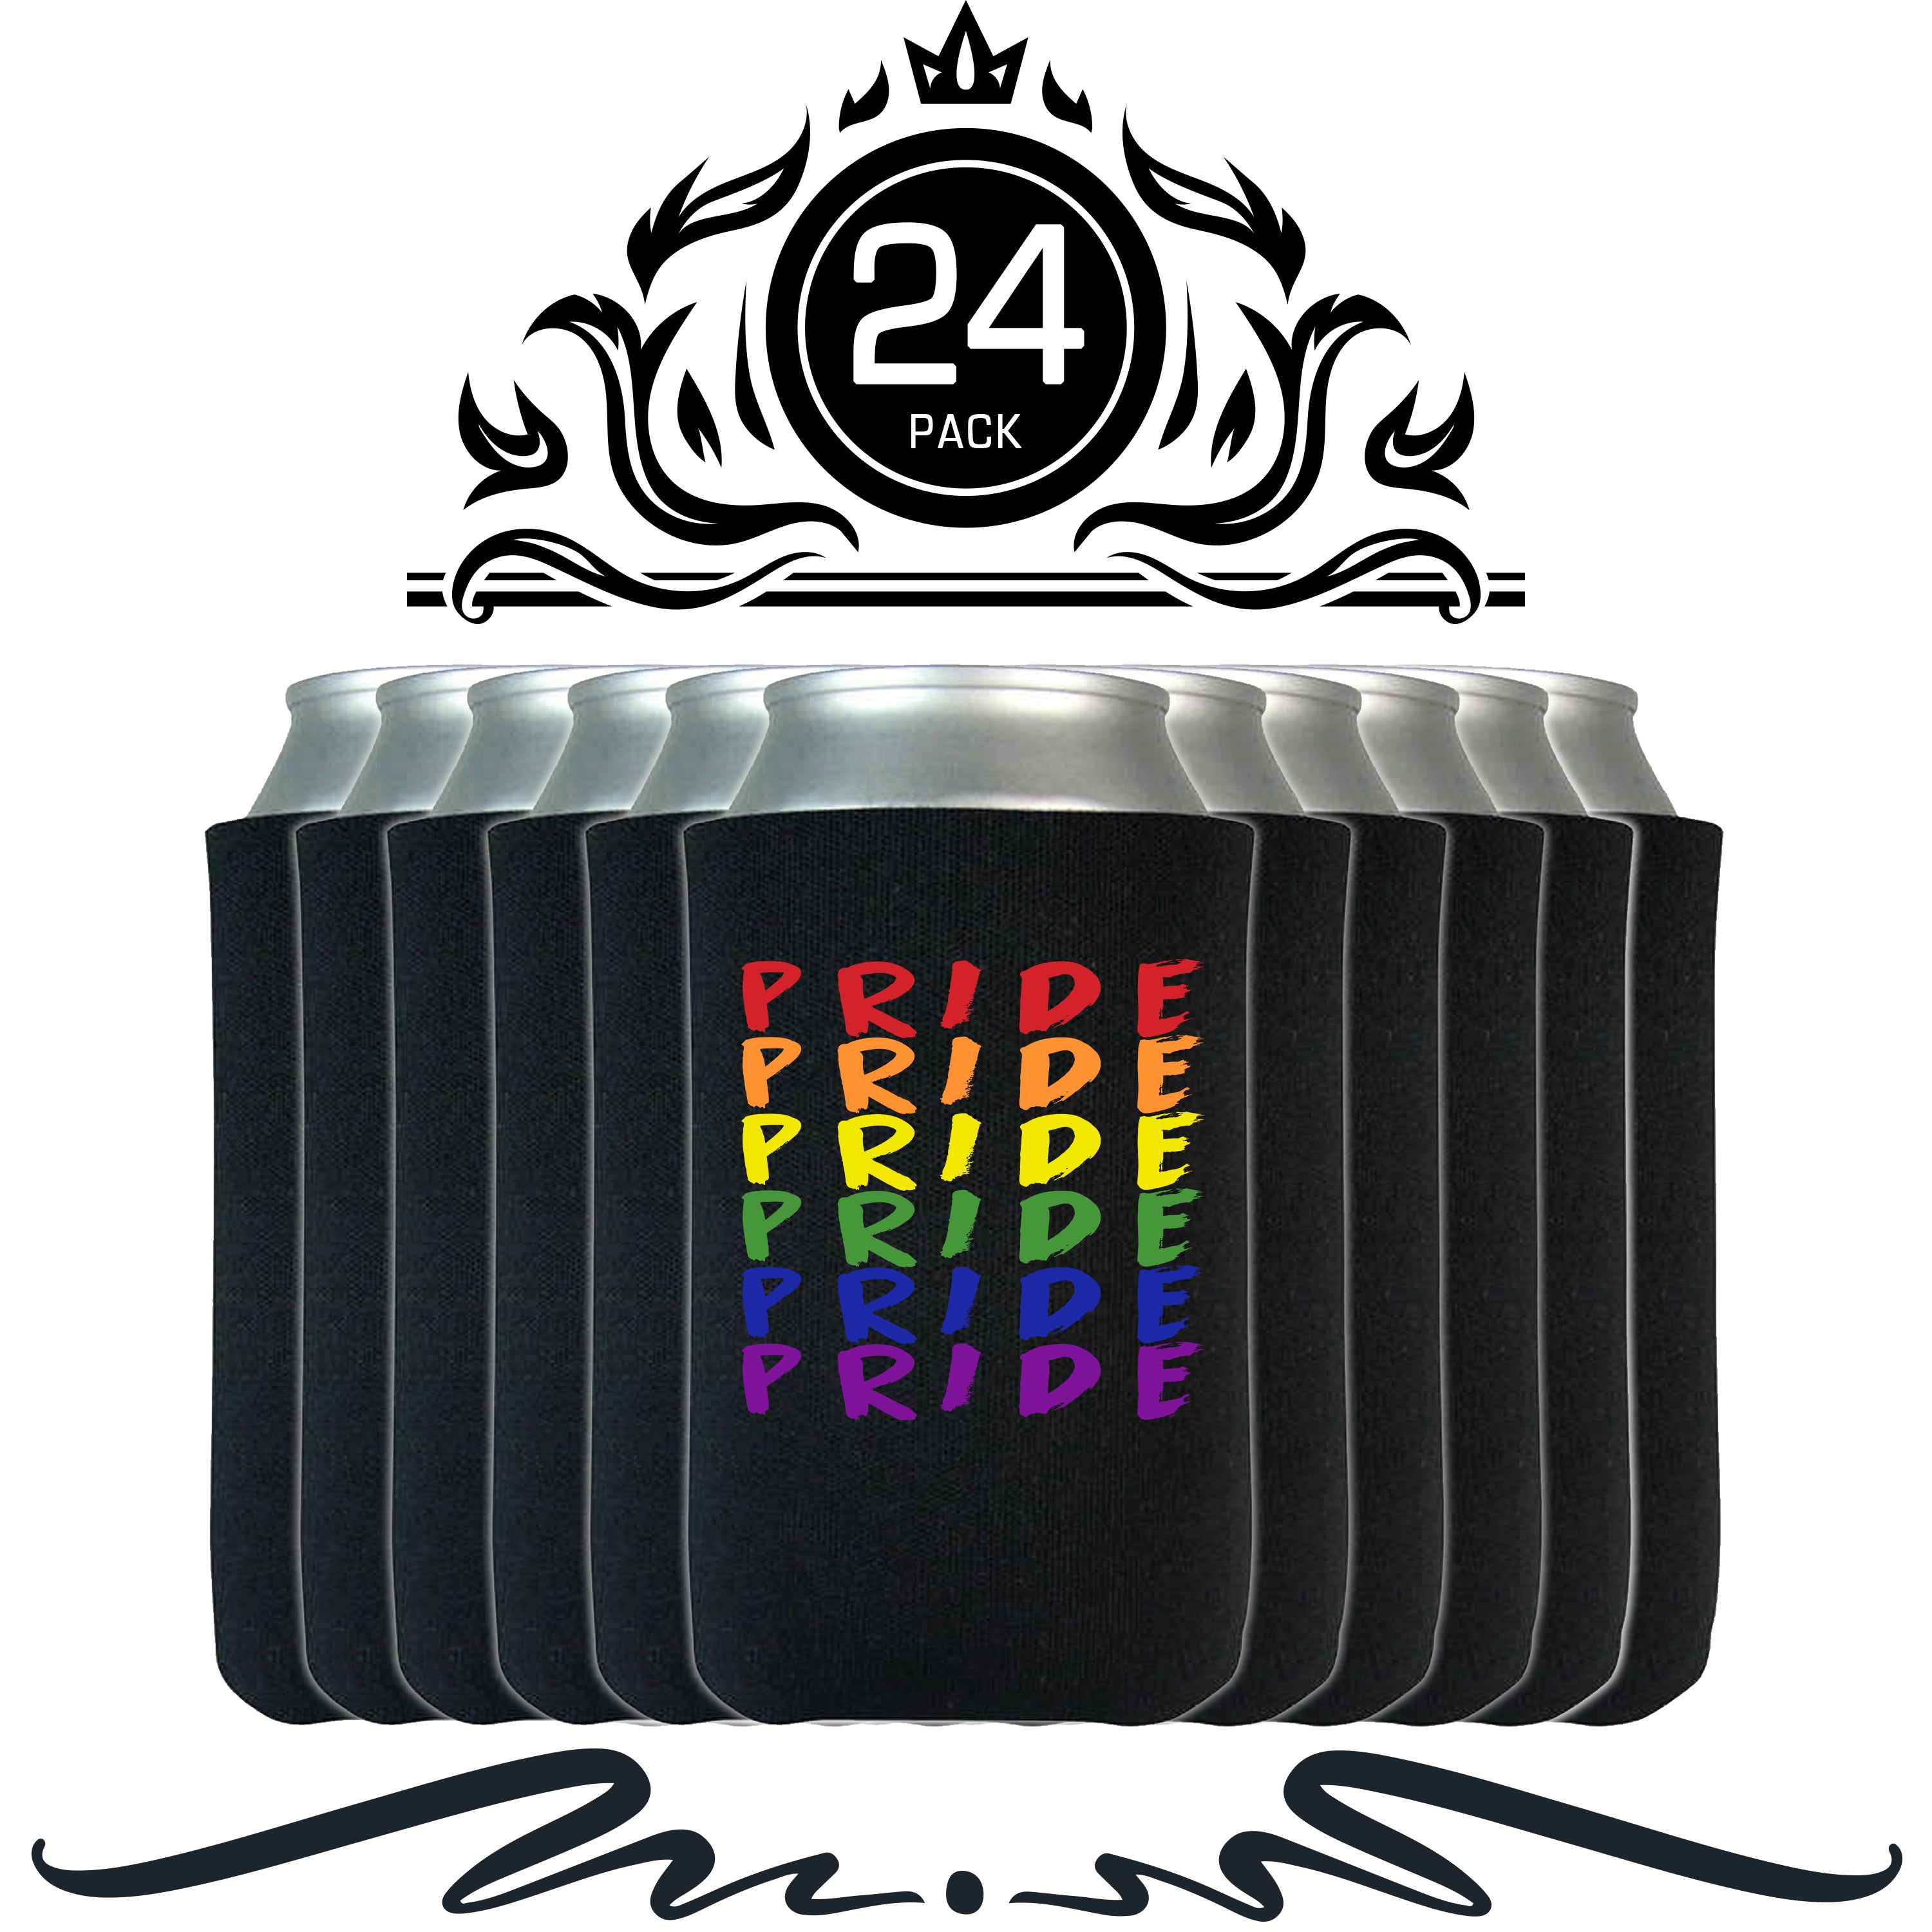 S4E® Pride Rainbow Gay Can Coolie, Insulating Sleeve Holder for Beverage Cups